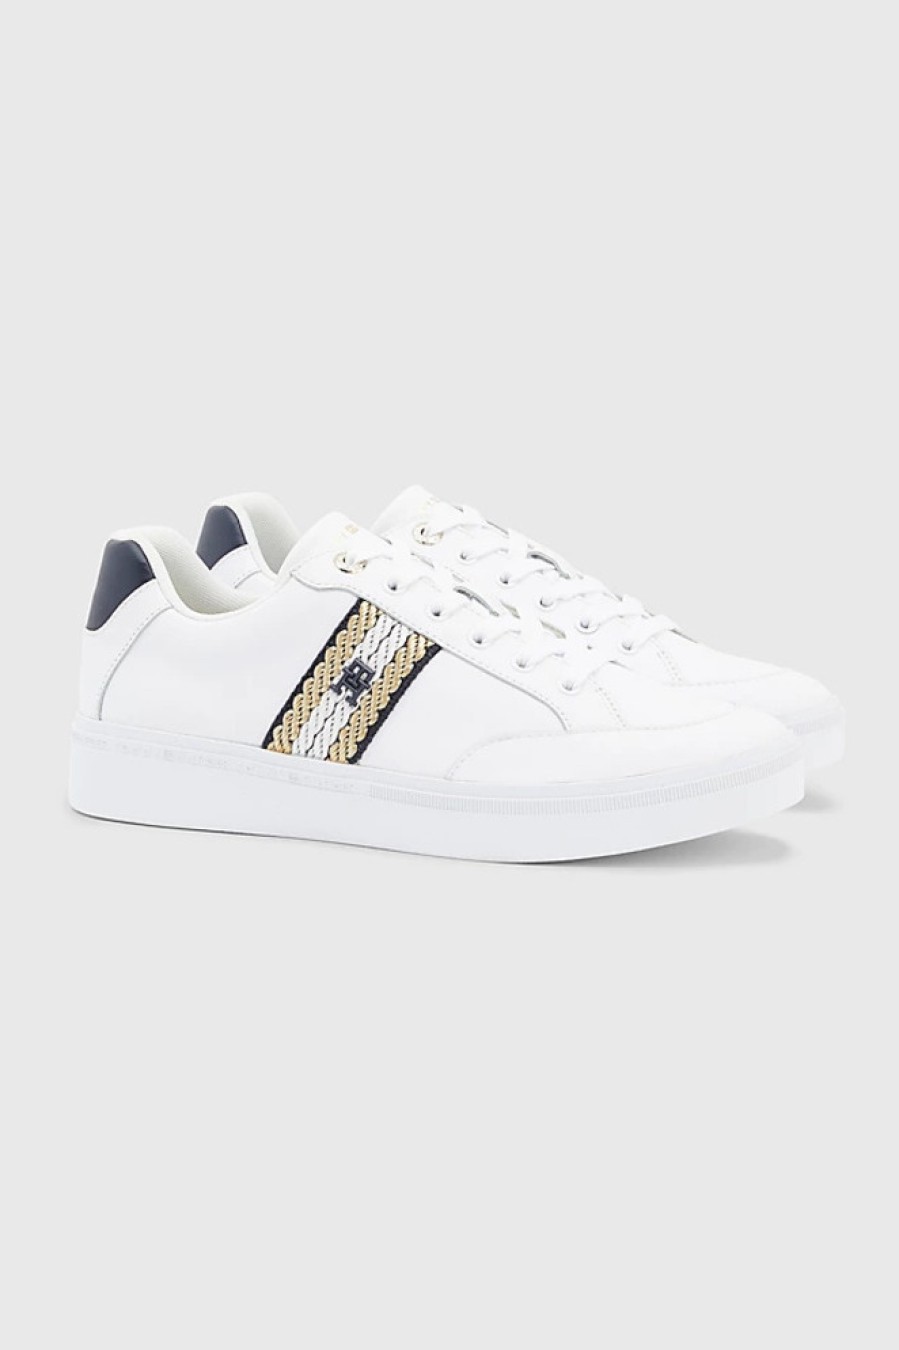 TOMMY HILFIGER SNEAKERS ΠΑΠΟΥΤΣΙΑ ΓΥΝΑΙΚΕΙΑ COURT SNEAKER WITH WEBBING